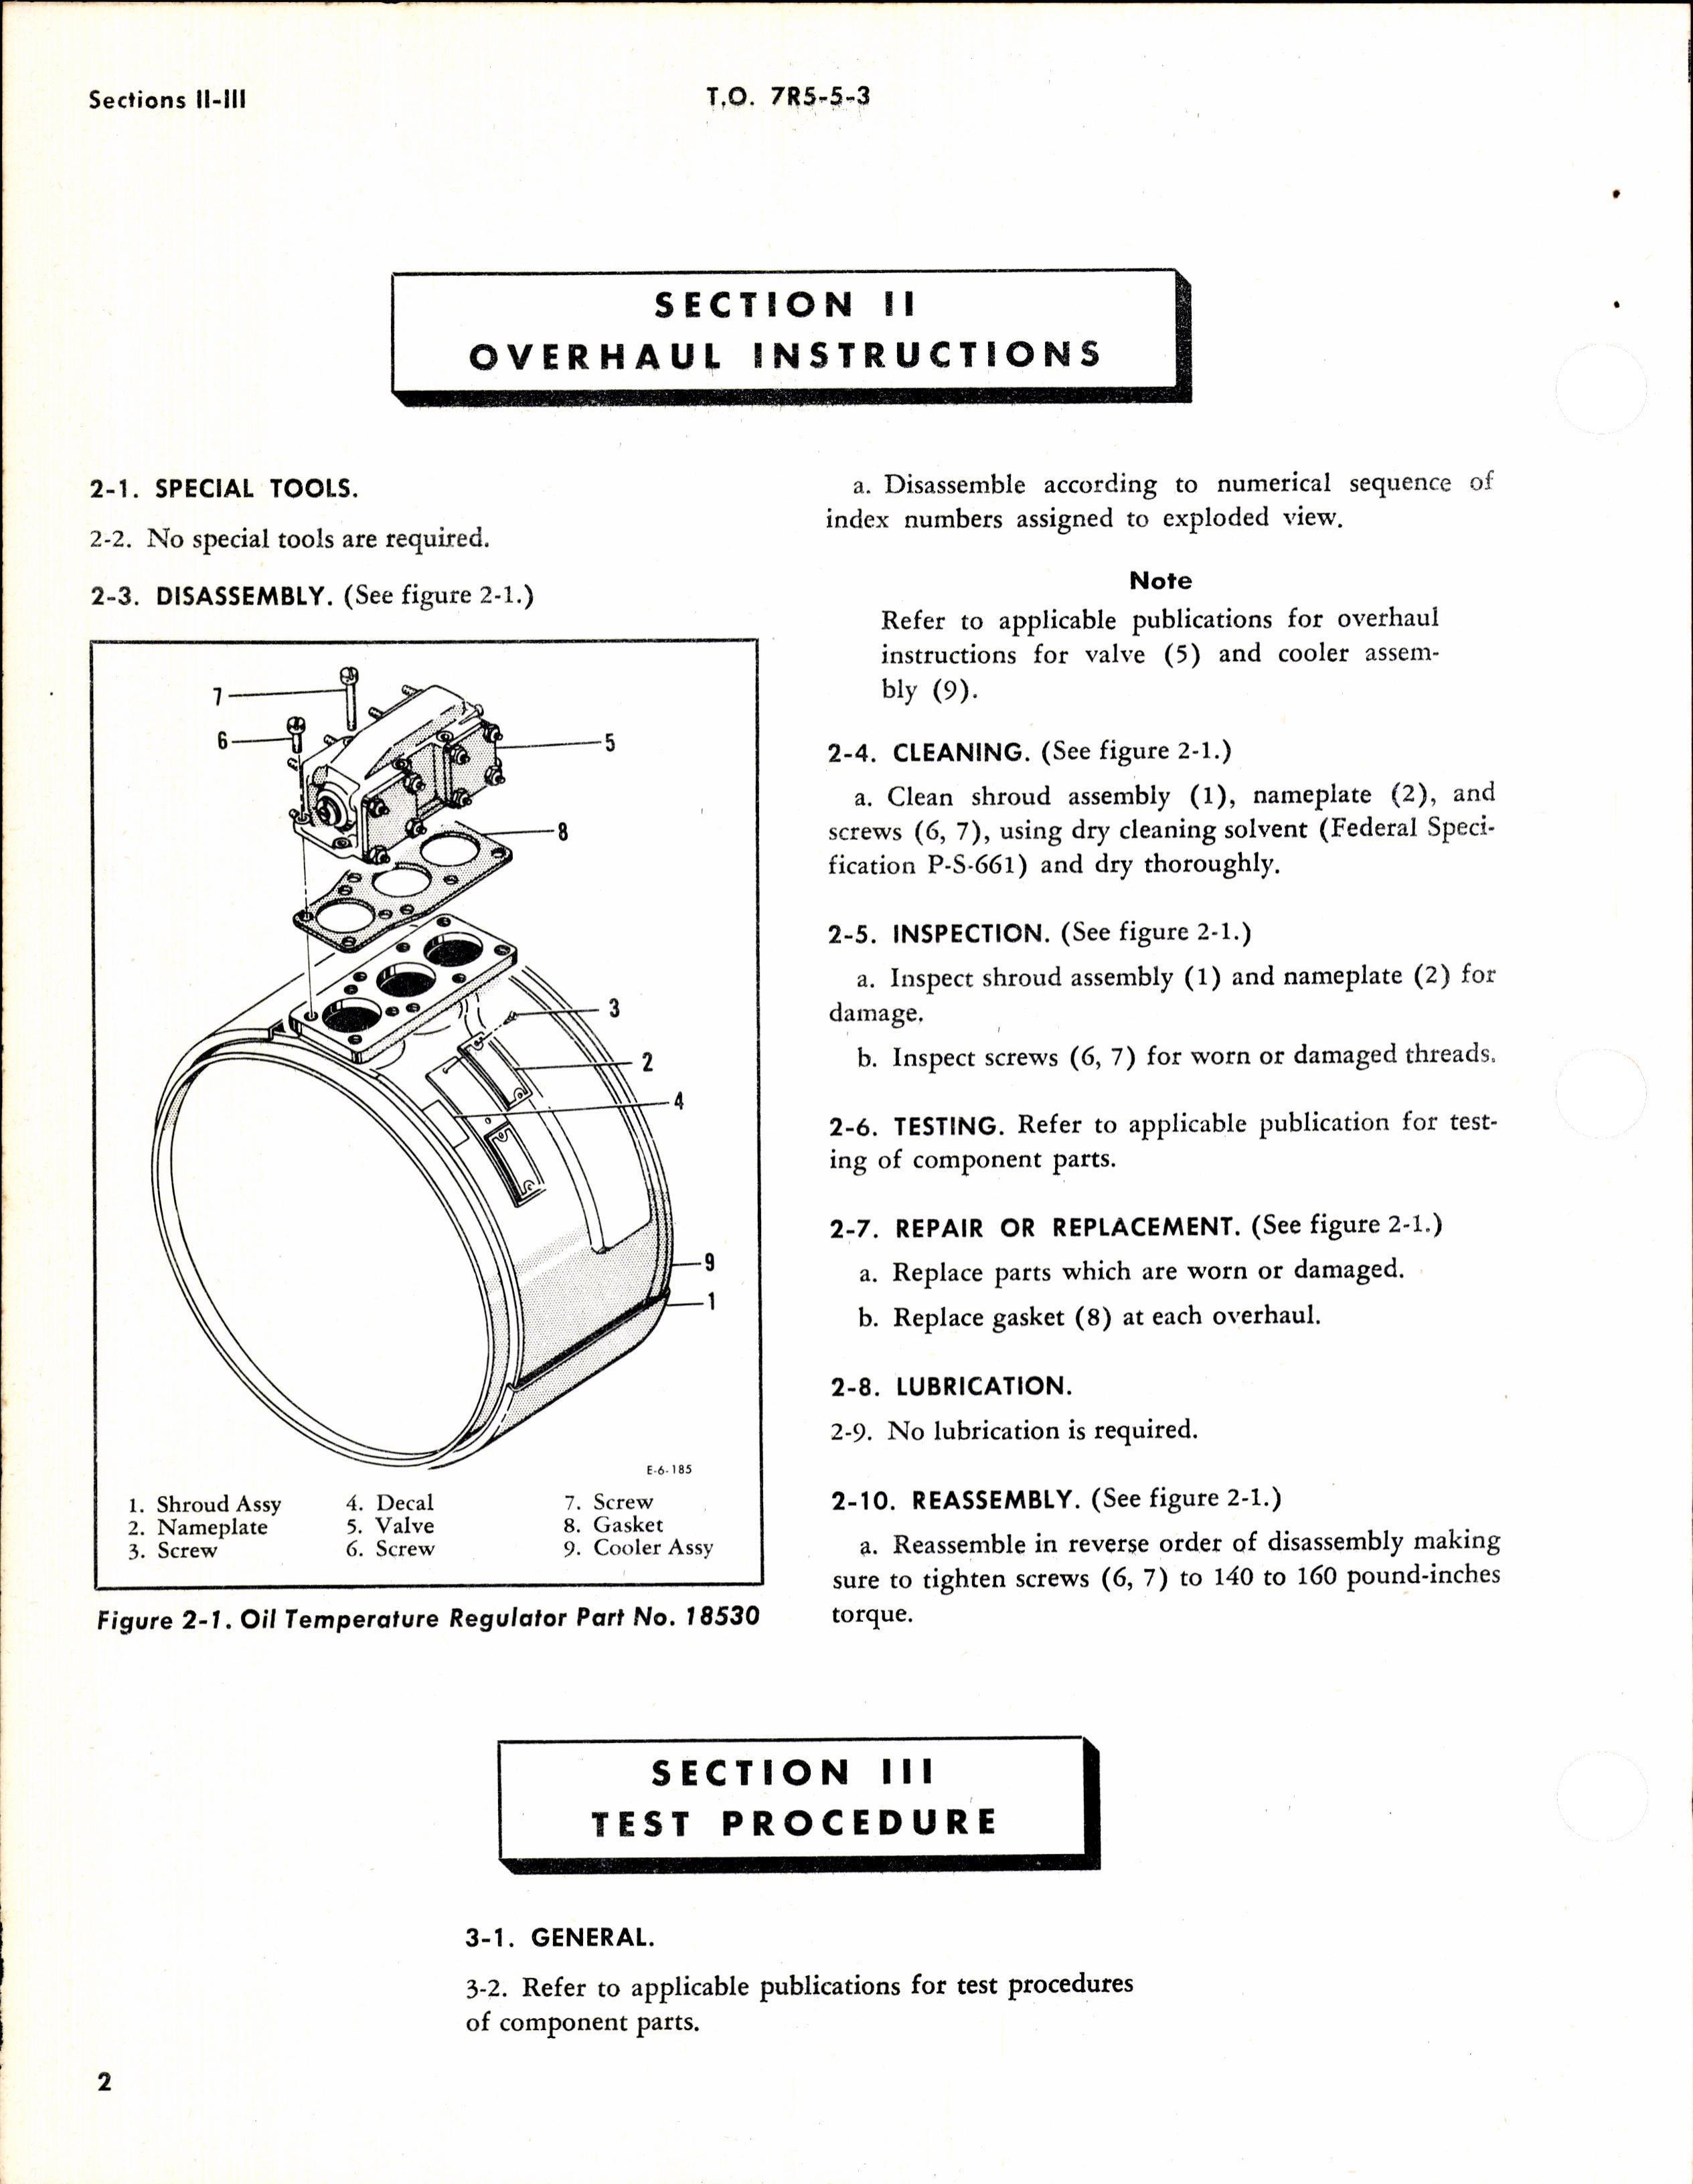 Sample page 4 from AirCorps Library document: Overhaul Instructions for Airesearch Oil Temperature Regulators 